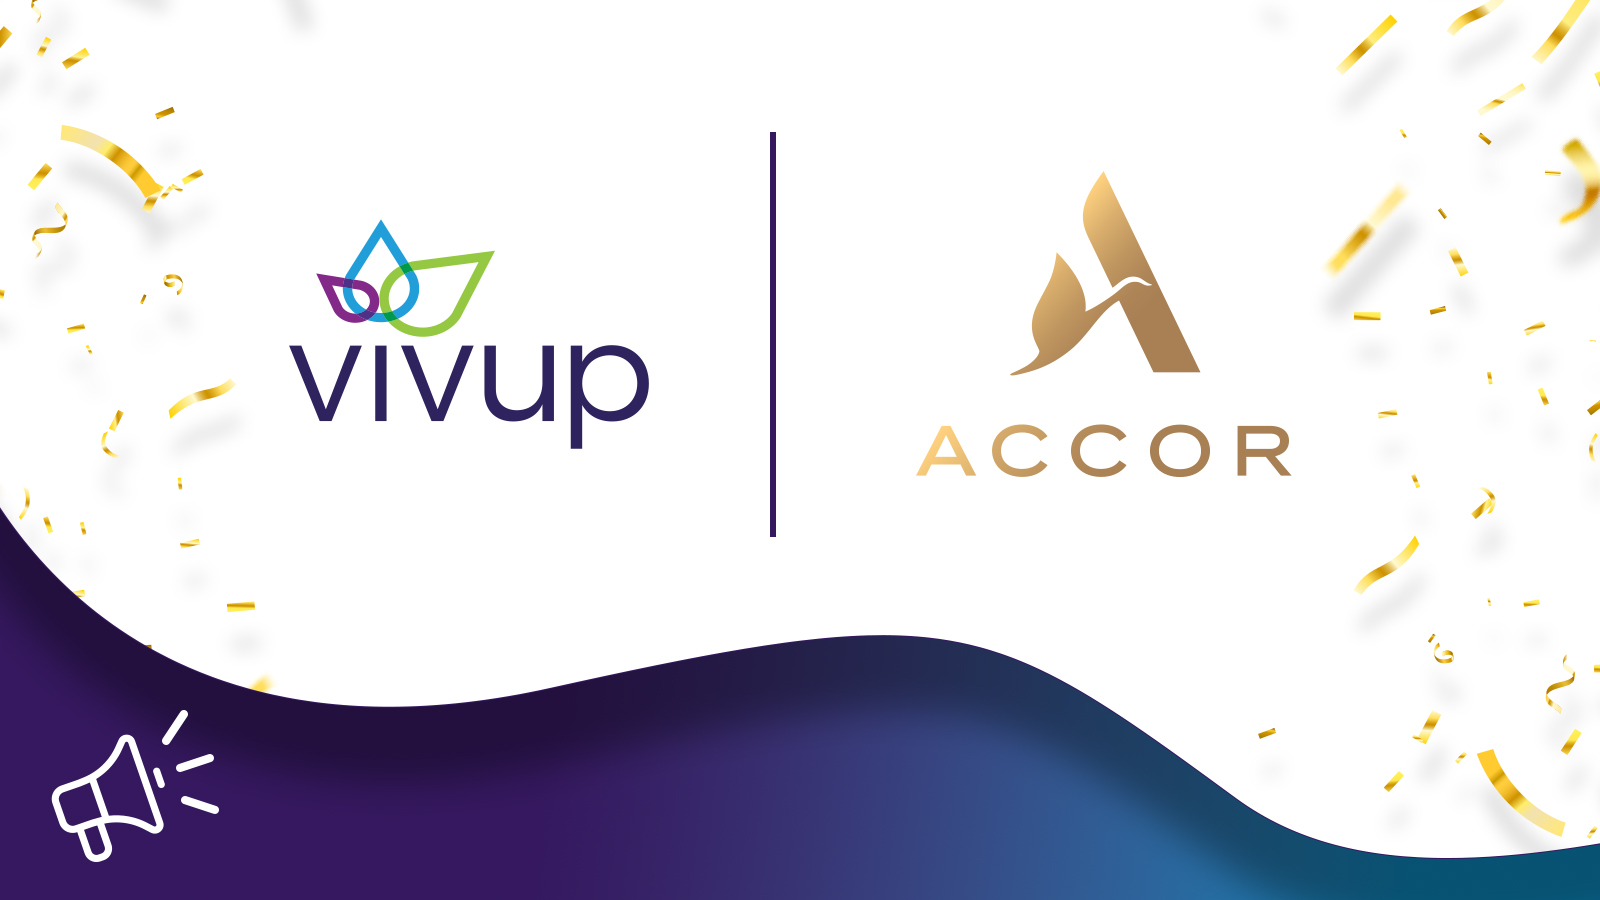 Vivup and Accor logo's on a partnership announcement